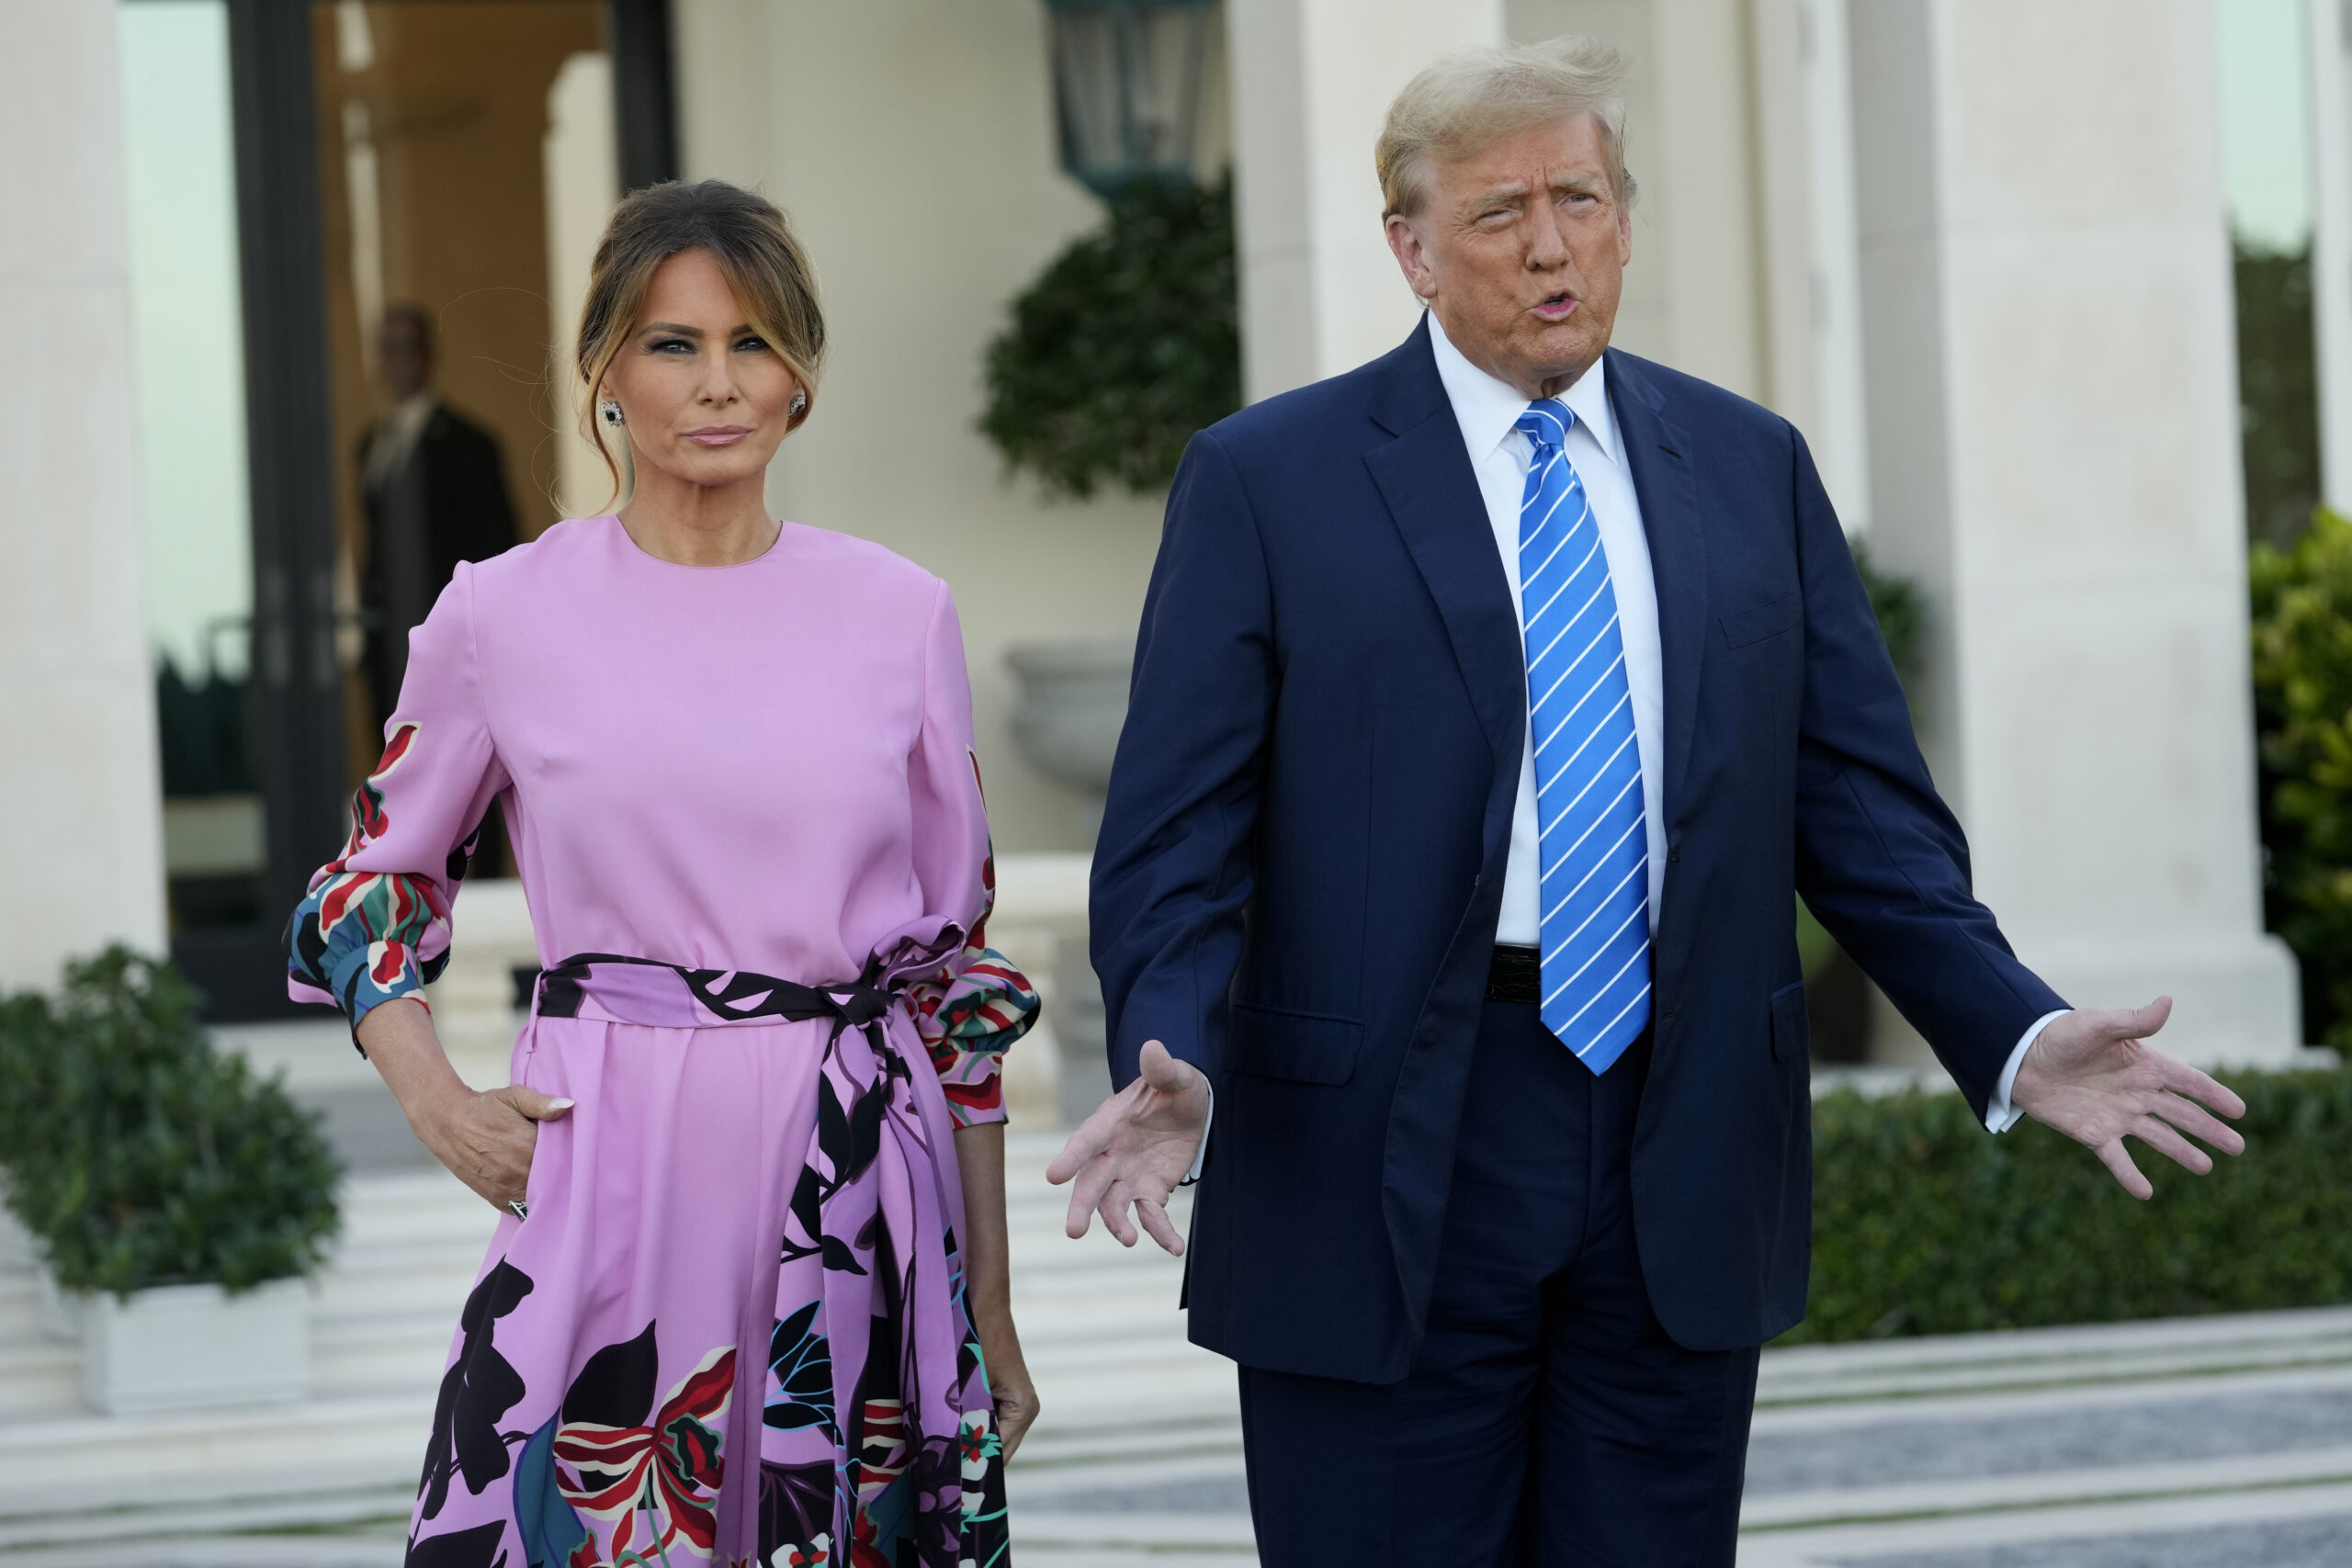 melania-trump-believes-that-her-husband's-trial-is-“a-disgrace”-for-her-campaign,-according-to-nyt